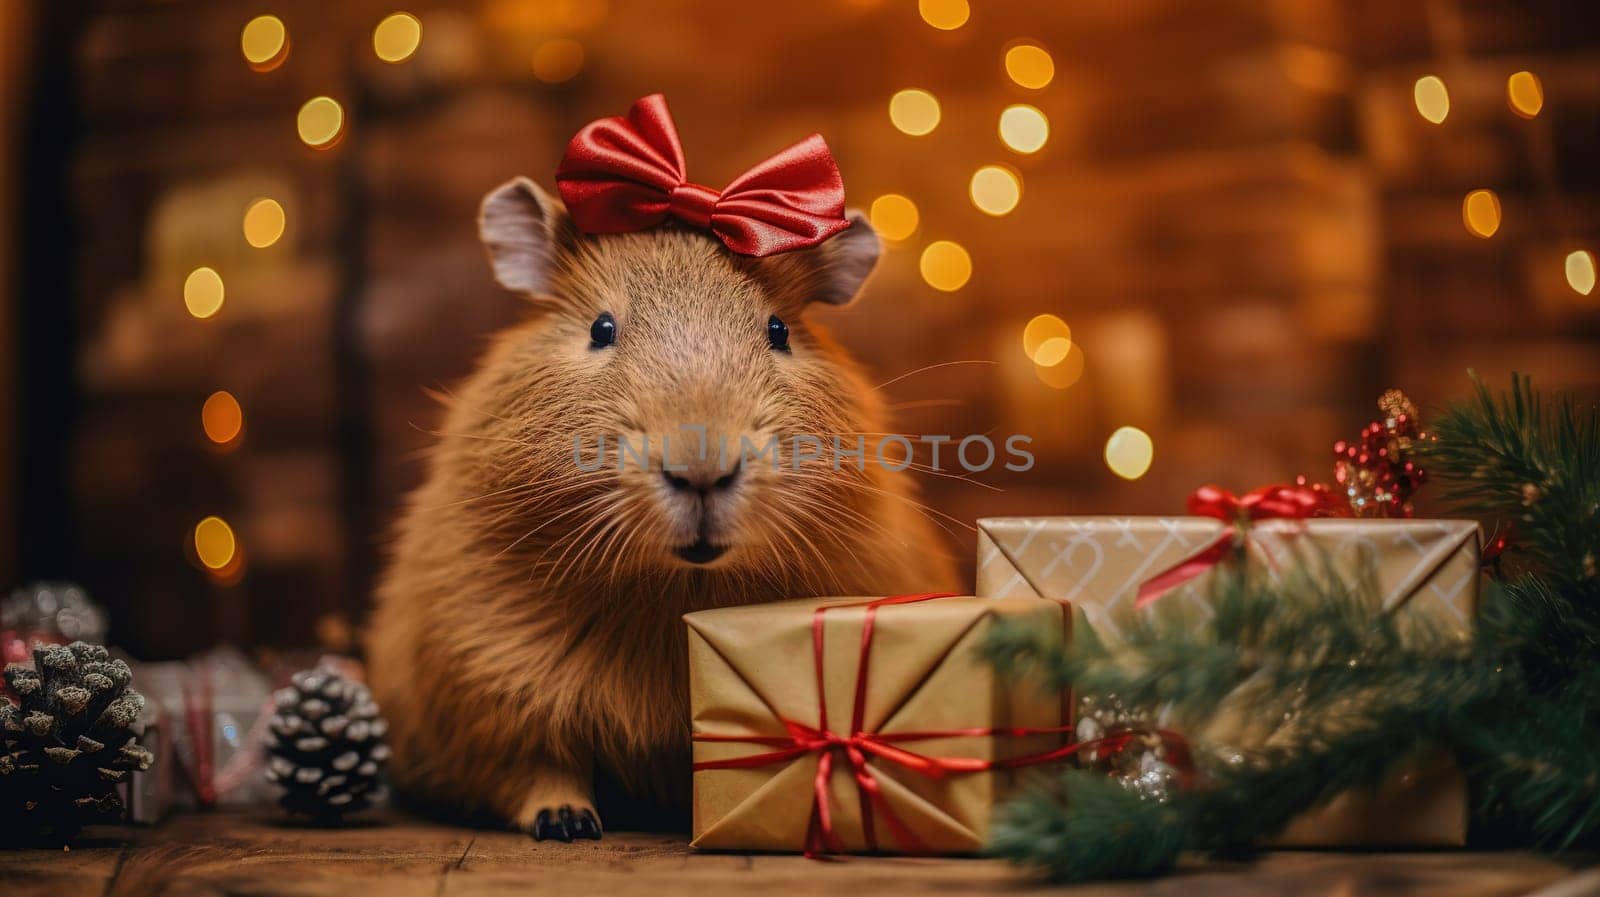 Guinea pig sits on a Christmas tree surrounded by boxes with gifts, celebrating the holiday in a family with pet by KaterinaDalemans